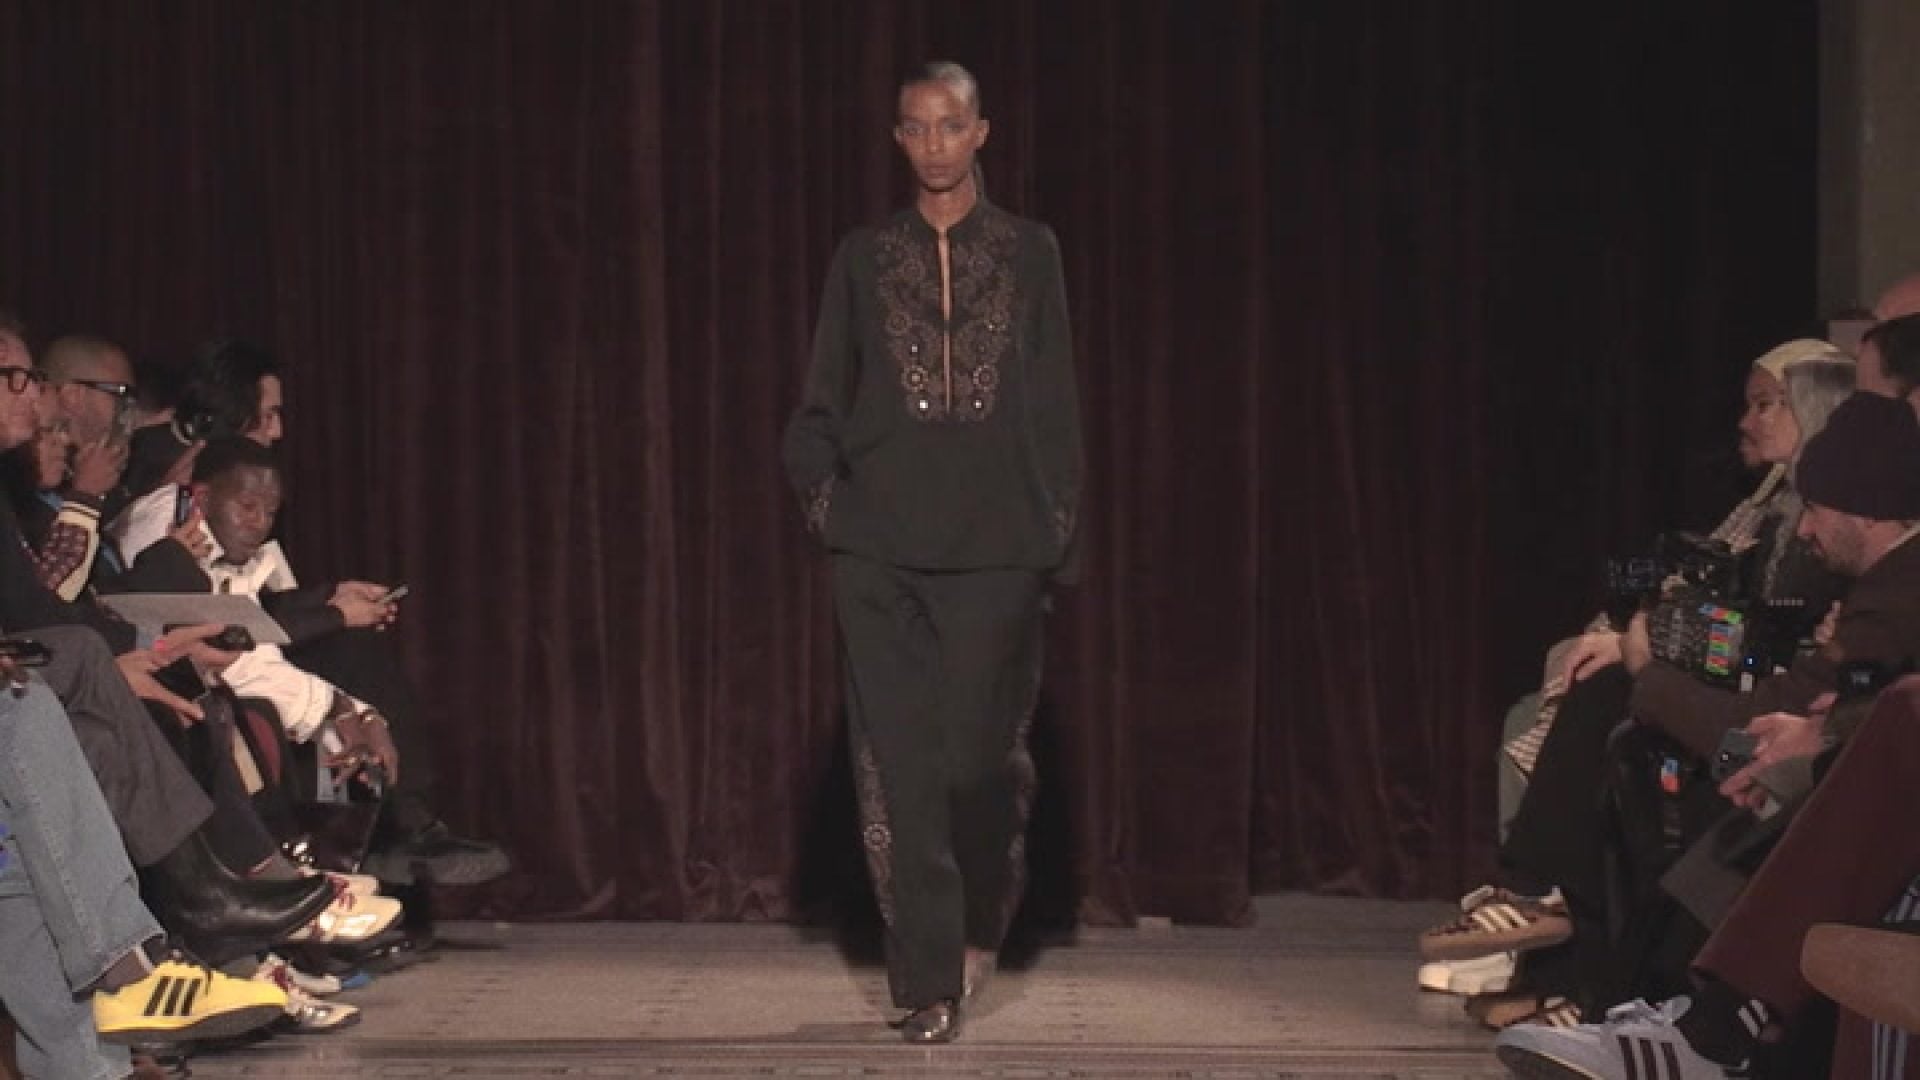 WATCH: Howard University Alumni On Being The Inspiration Behind Wales Bonner’s Fall/Winter 2024 Show